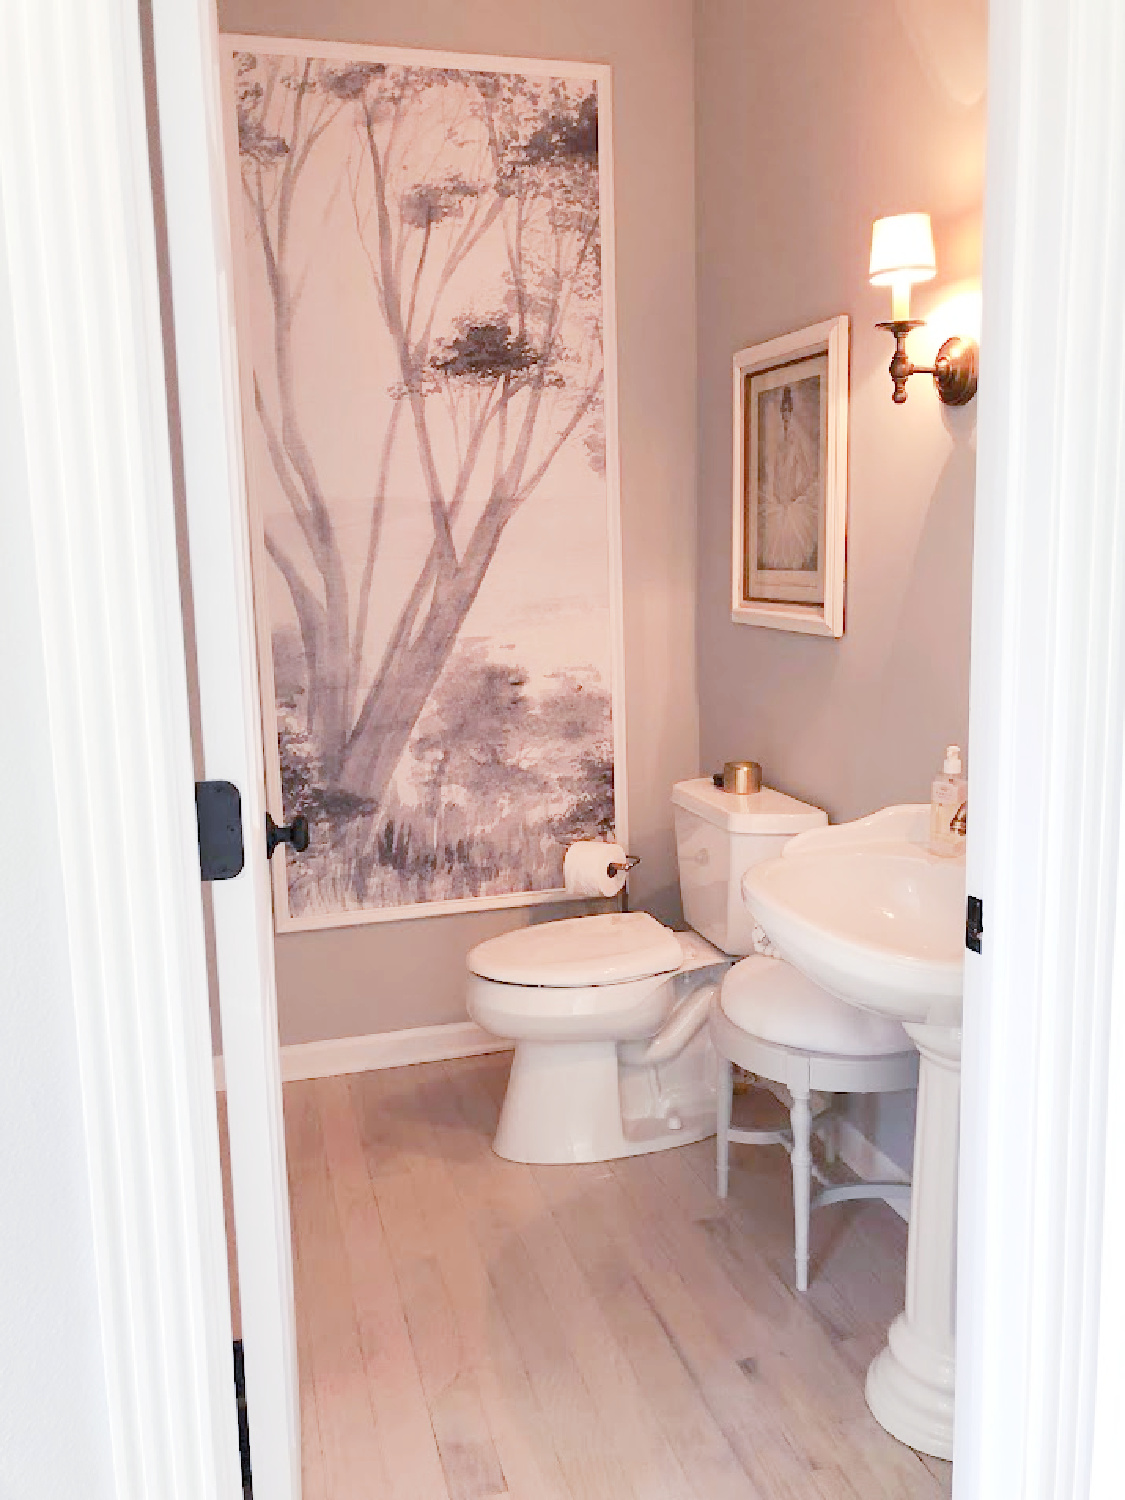 Powder bath in Georgian renovation with framed grisaille tree mural - Hello Lovely Studio.